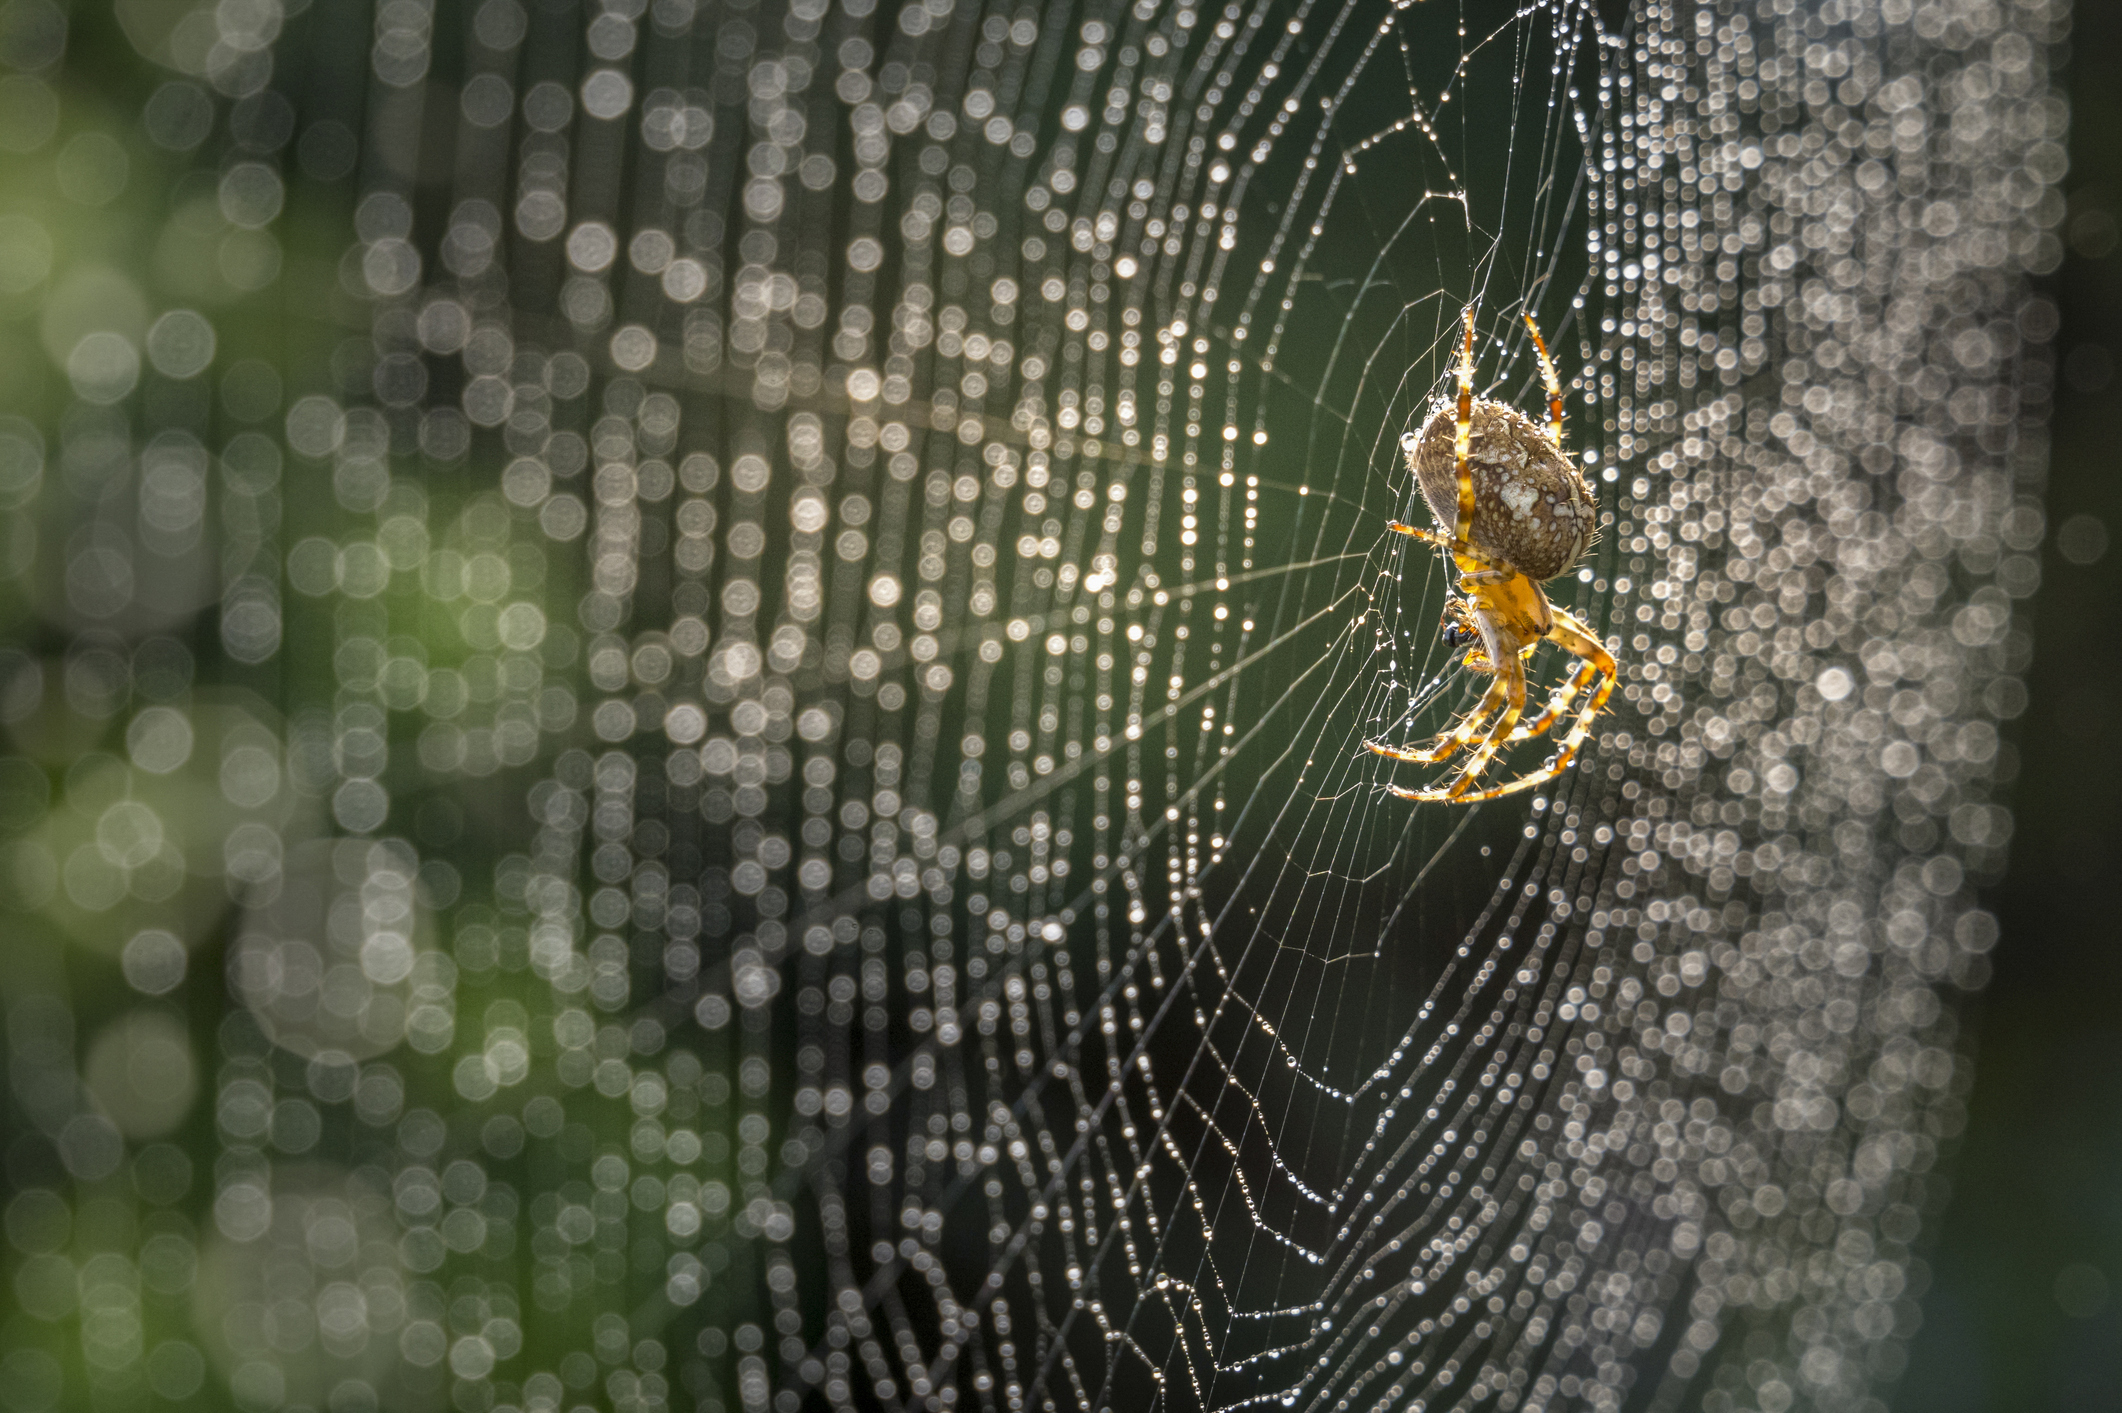 Smithsonian Insider – Drugged spiders' web spinning may hold keys